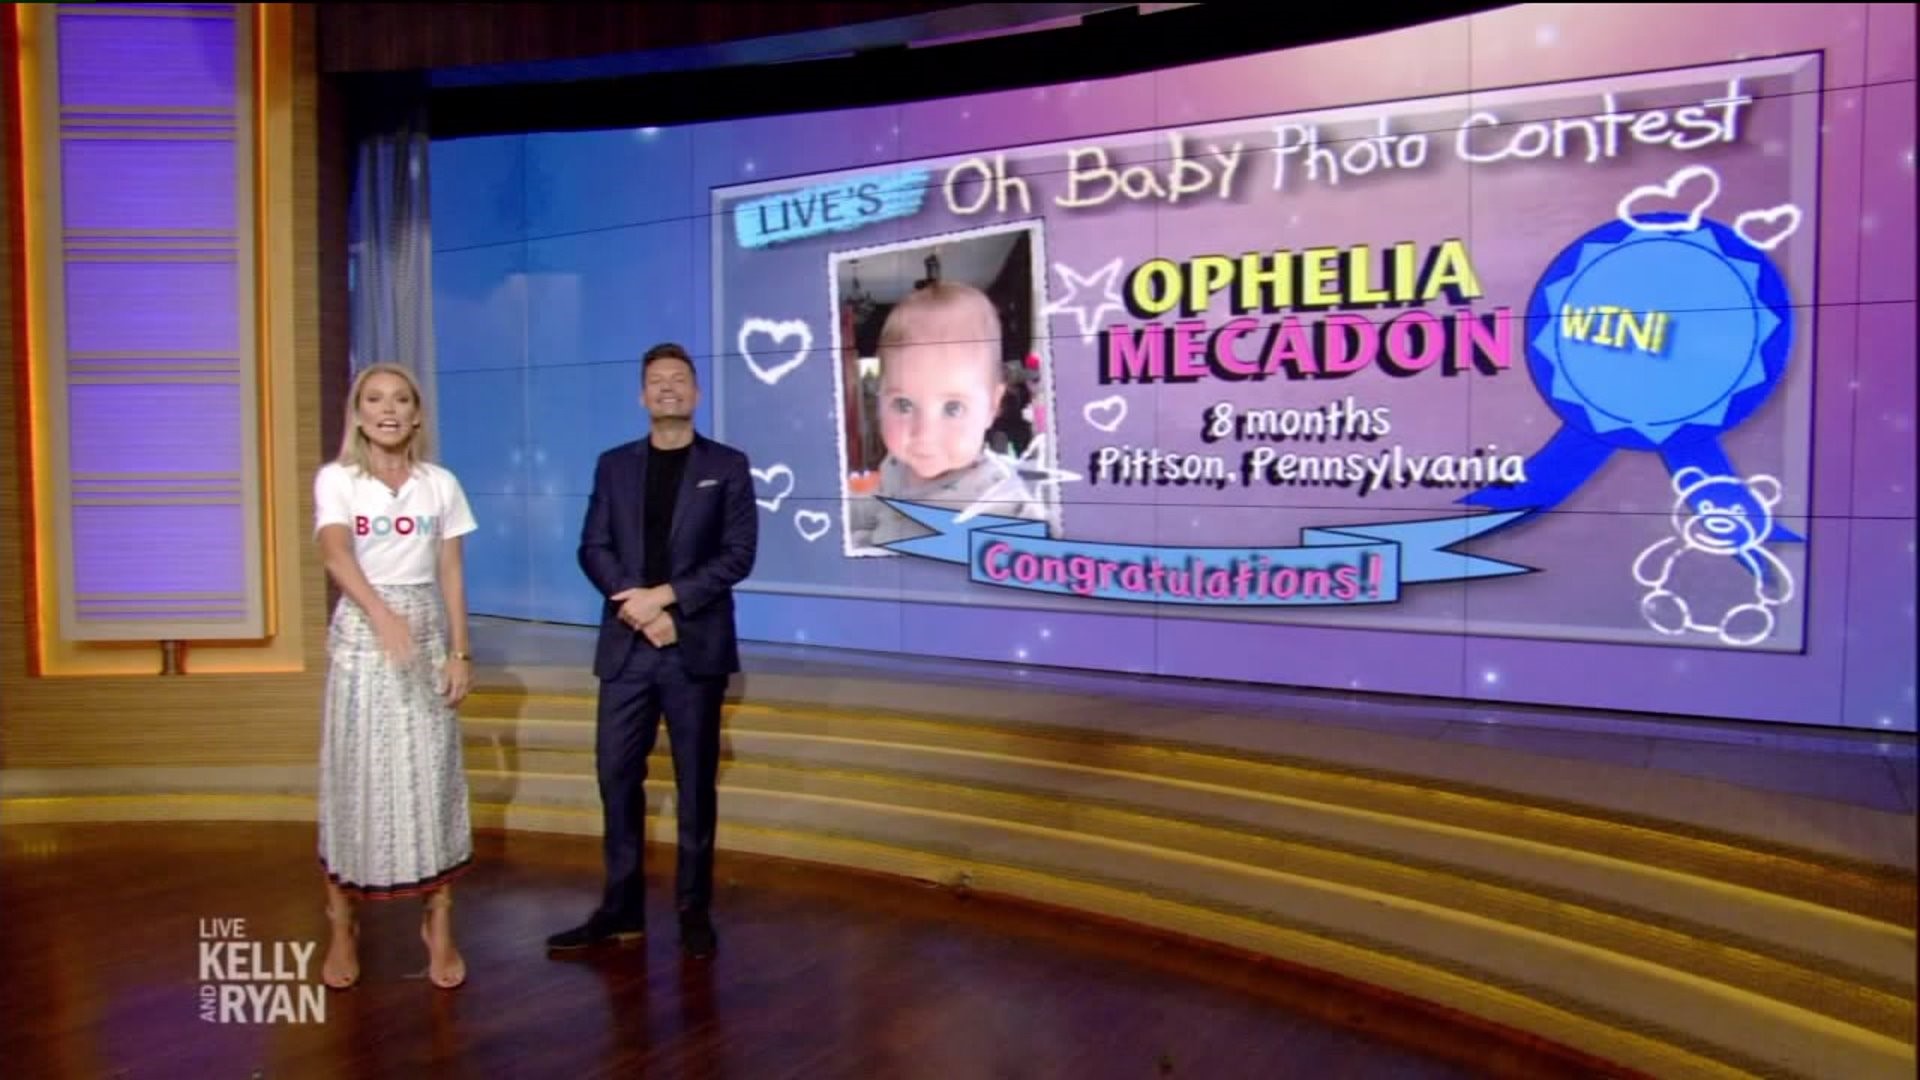 Live with Kelly and Ryan "Oh Baby Photo Contest" Winner